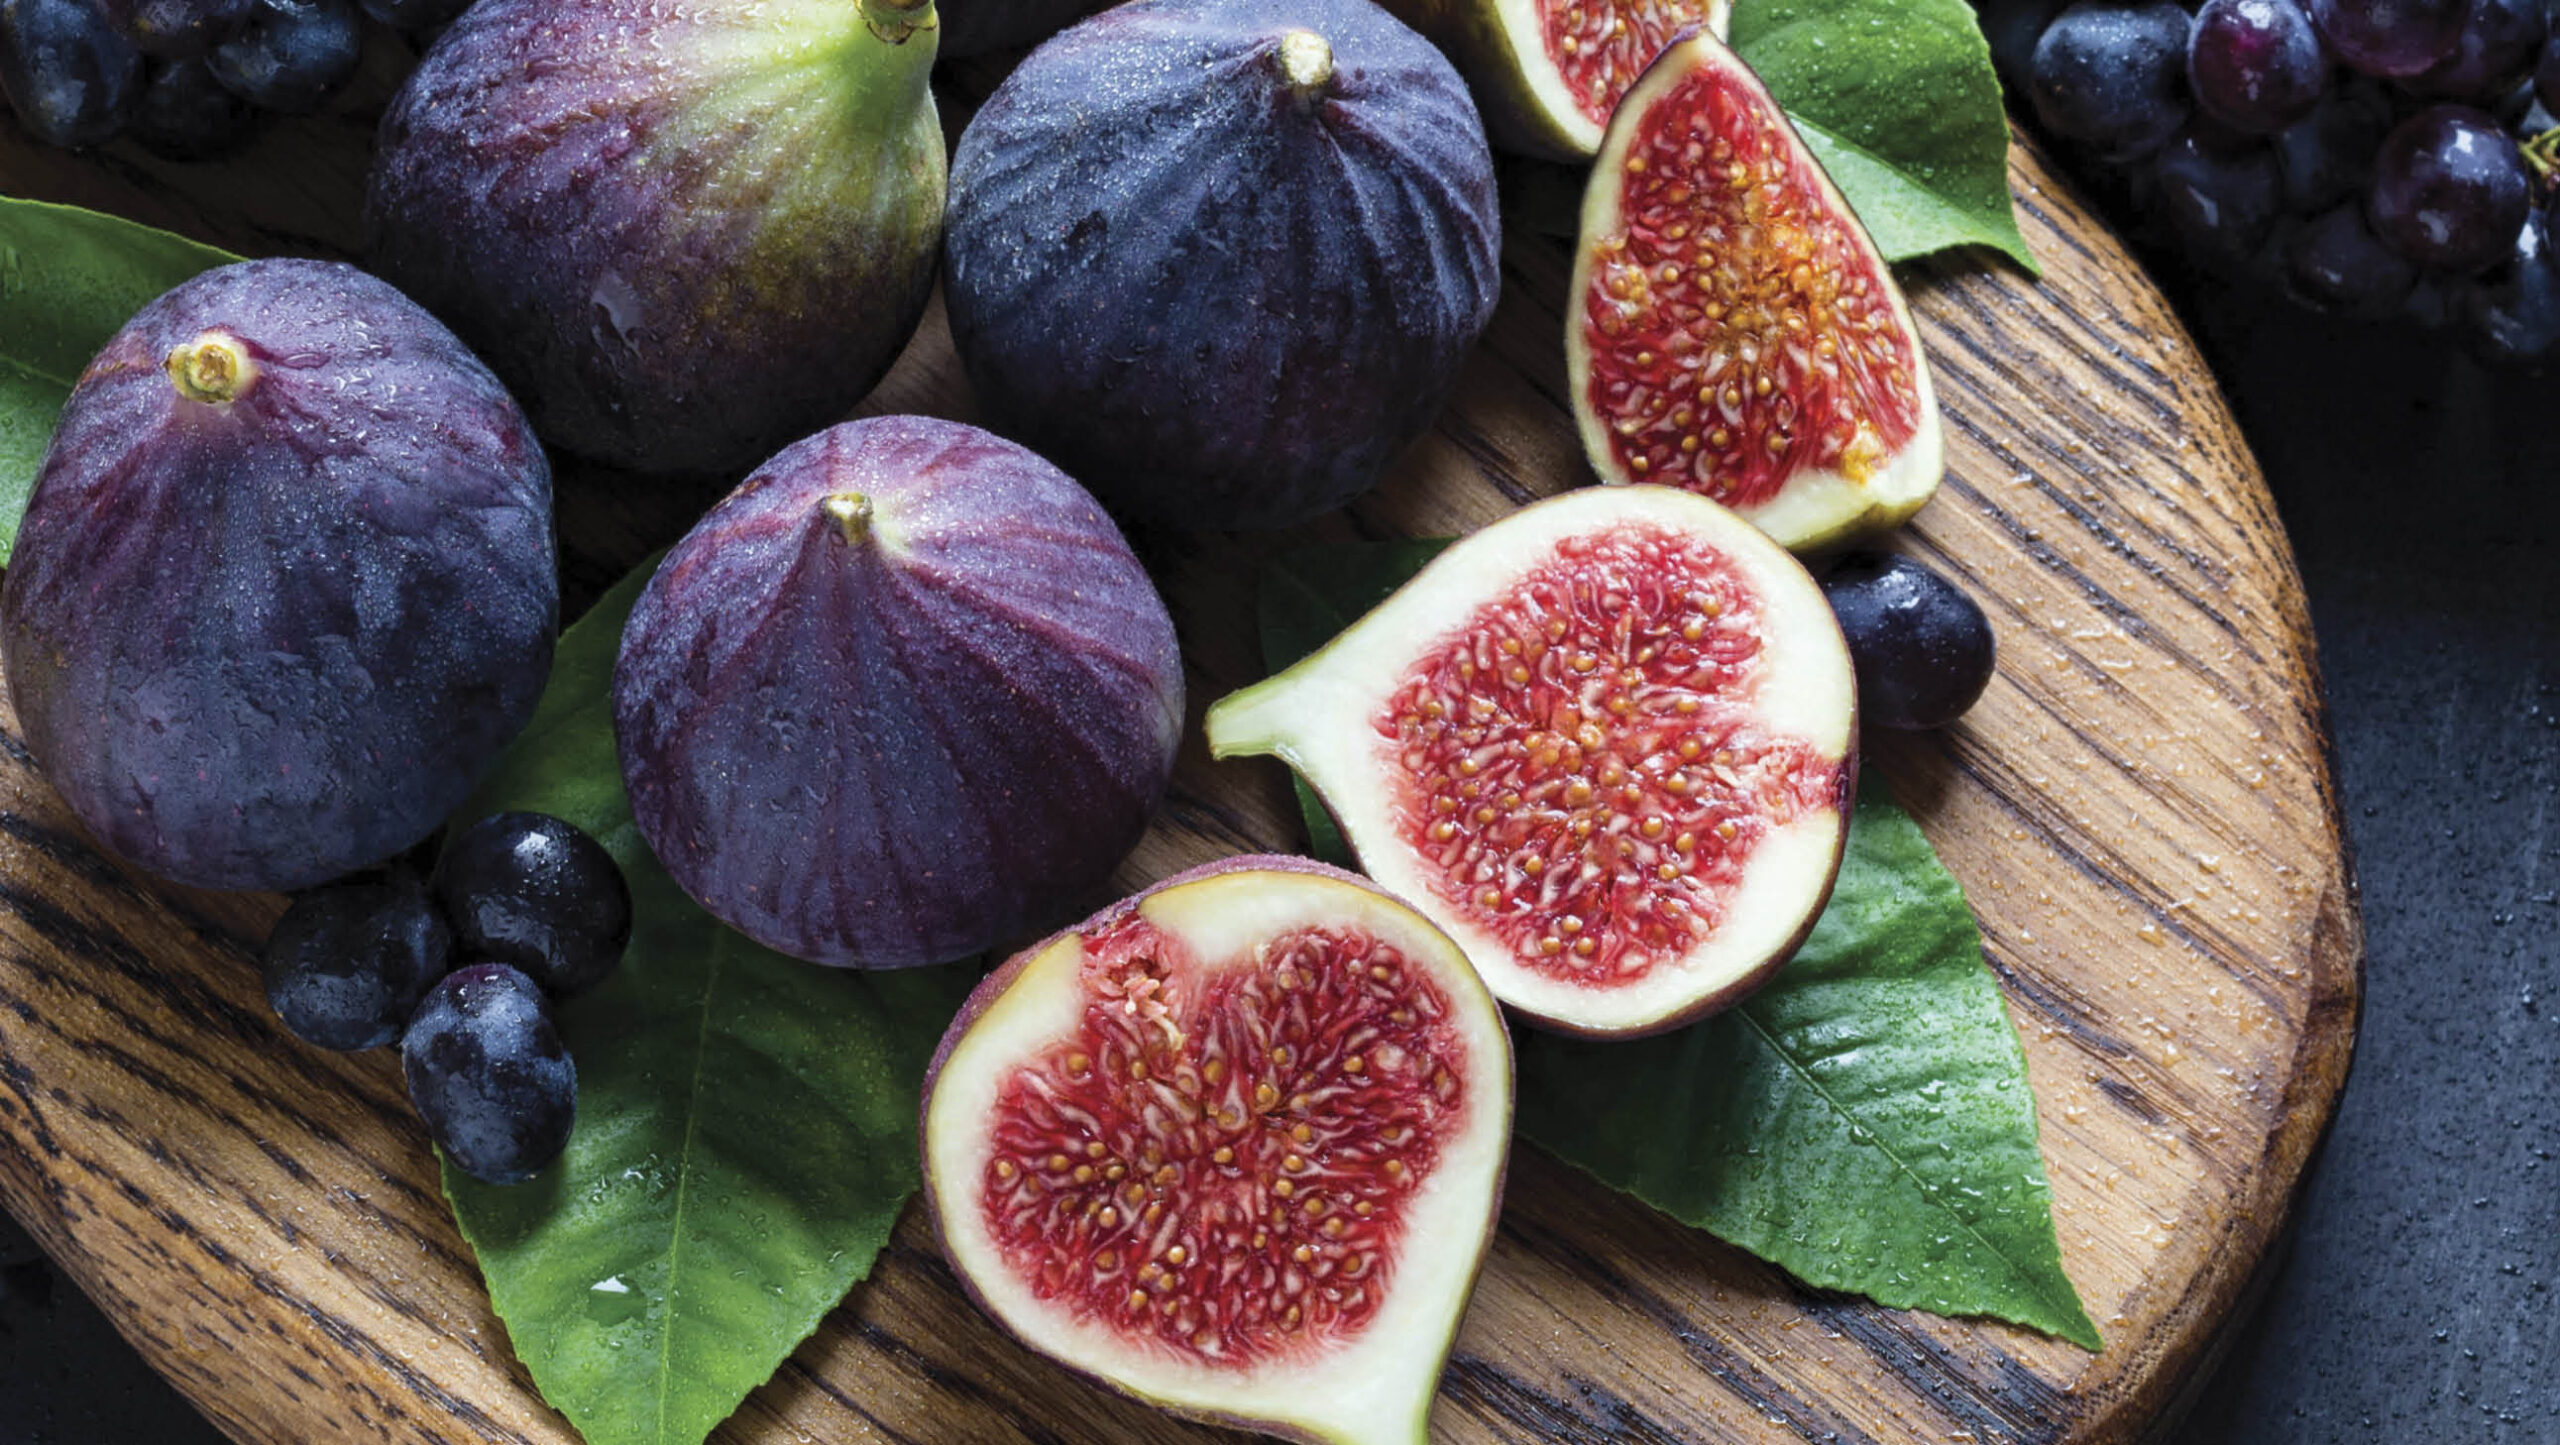 Figs are extremely long-lived and hardy.